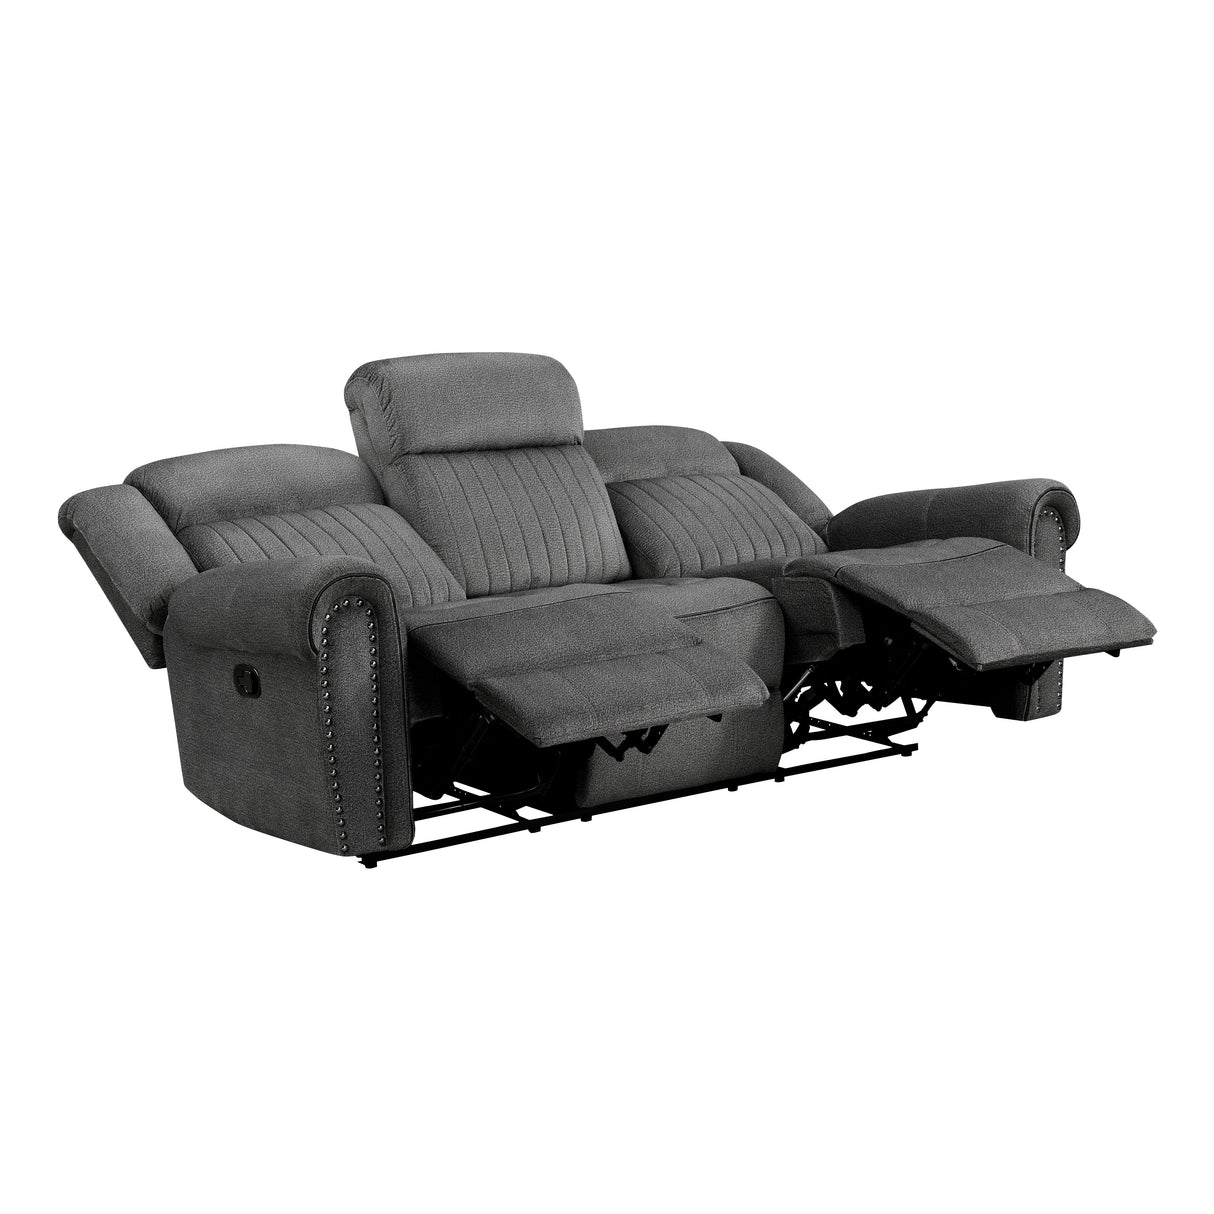 Brennen Charcoal Double Reclining Sofa